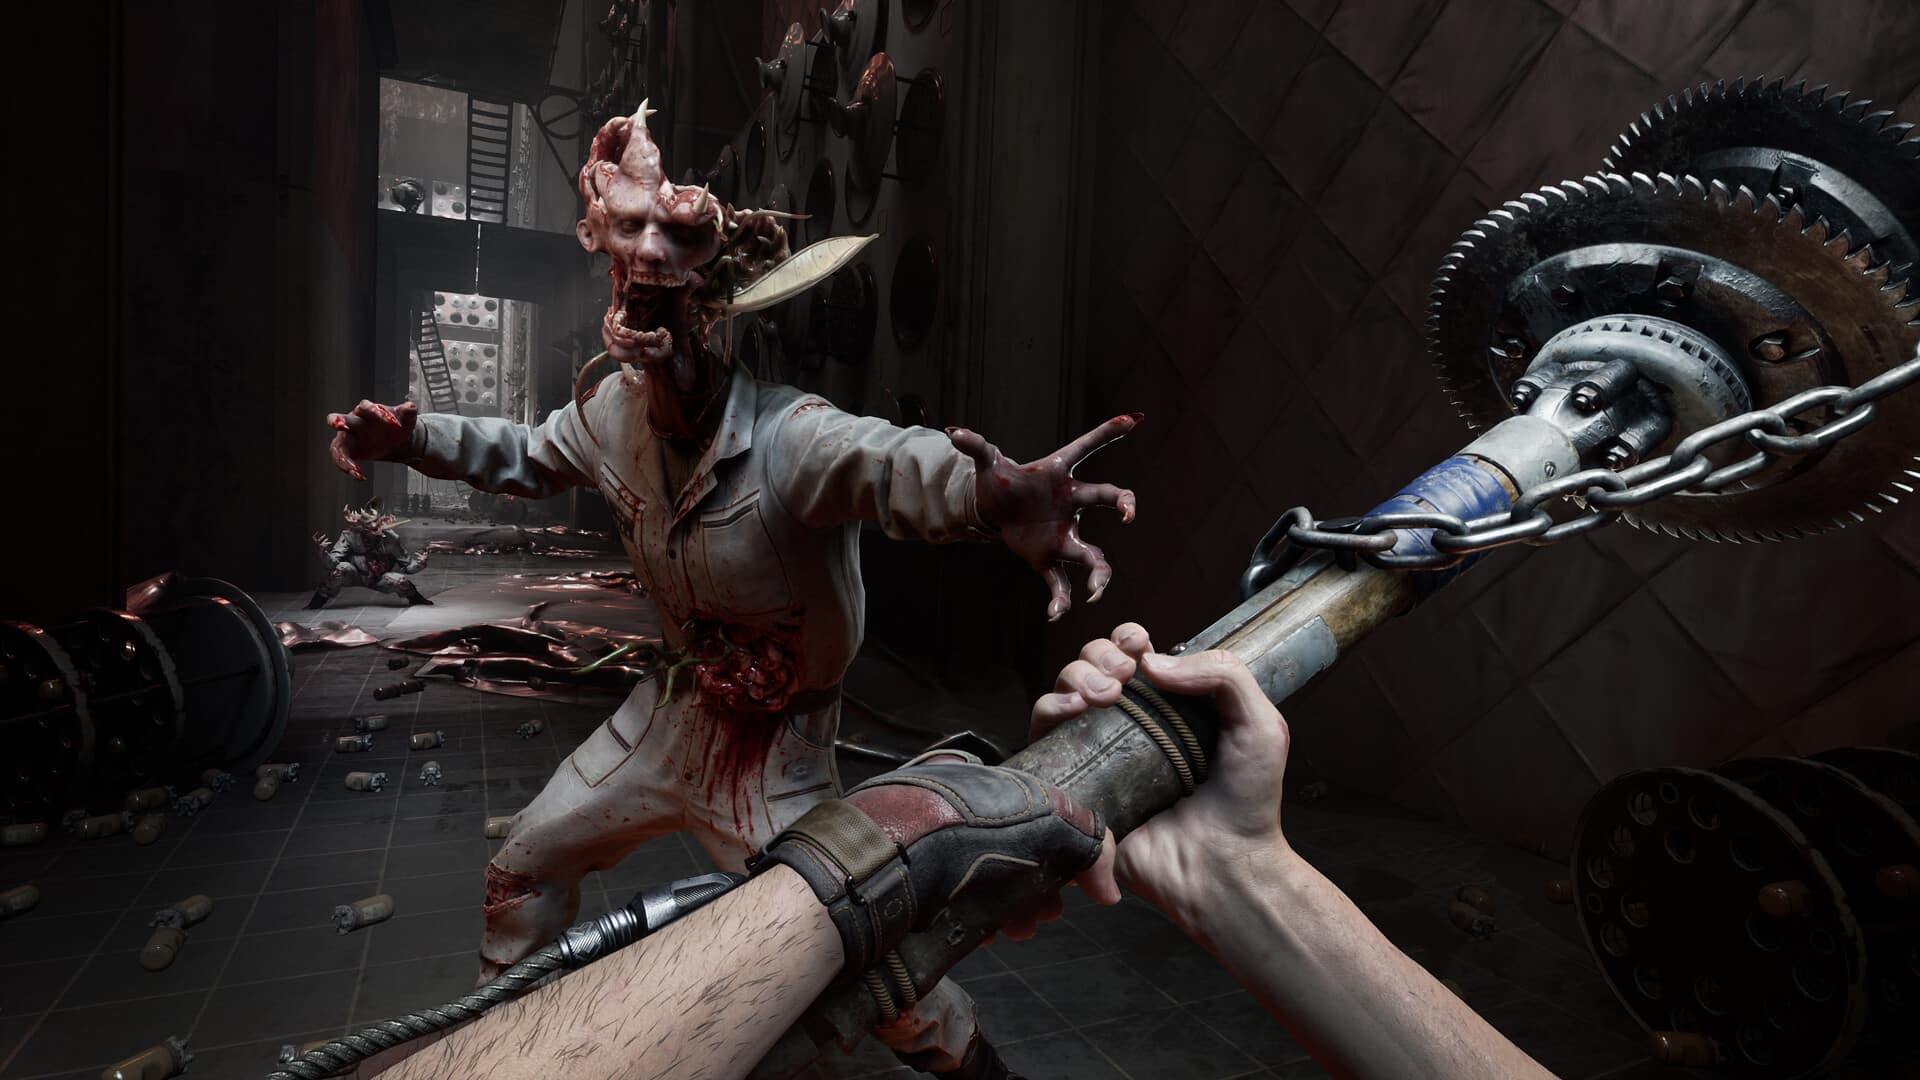 Action-RPG FPS ‘Atomic Heart’ Gets Overview Video Showcasing 8-Minutes of Action